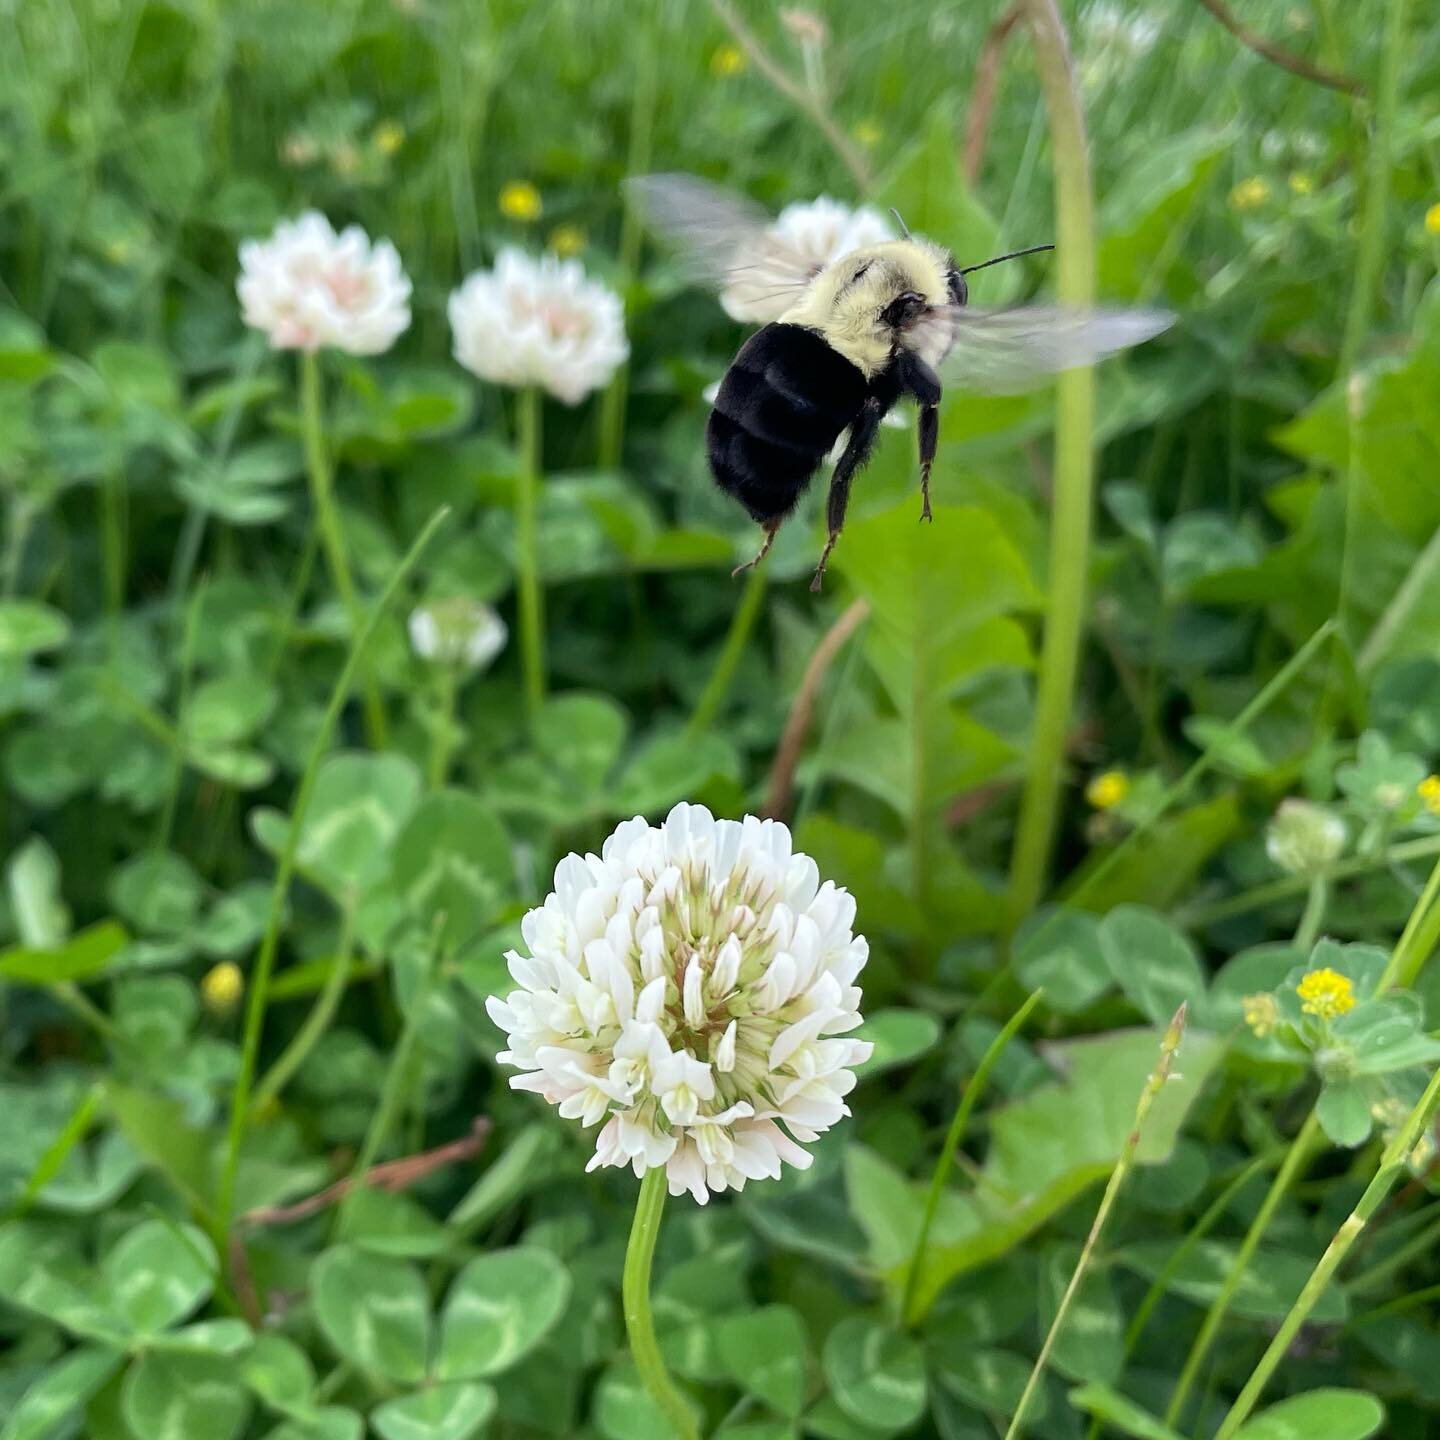 I just can&rsquo;t get over how adorable this bumble bee is. So precious. No four leaf clover here but a lucky shot! 🍀🐝☘️💛

#bumblebee #whiteclover #pollinators